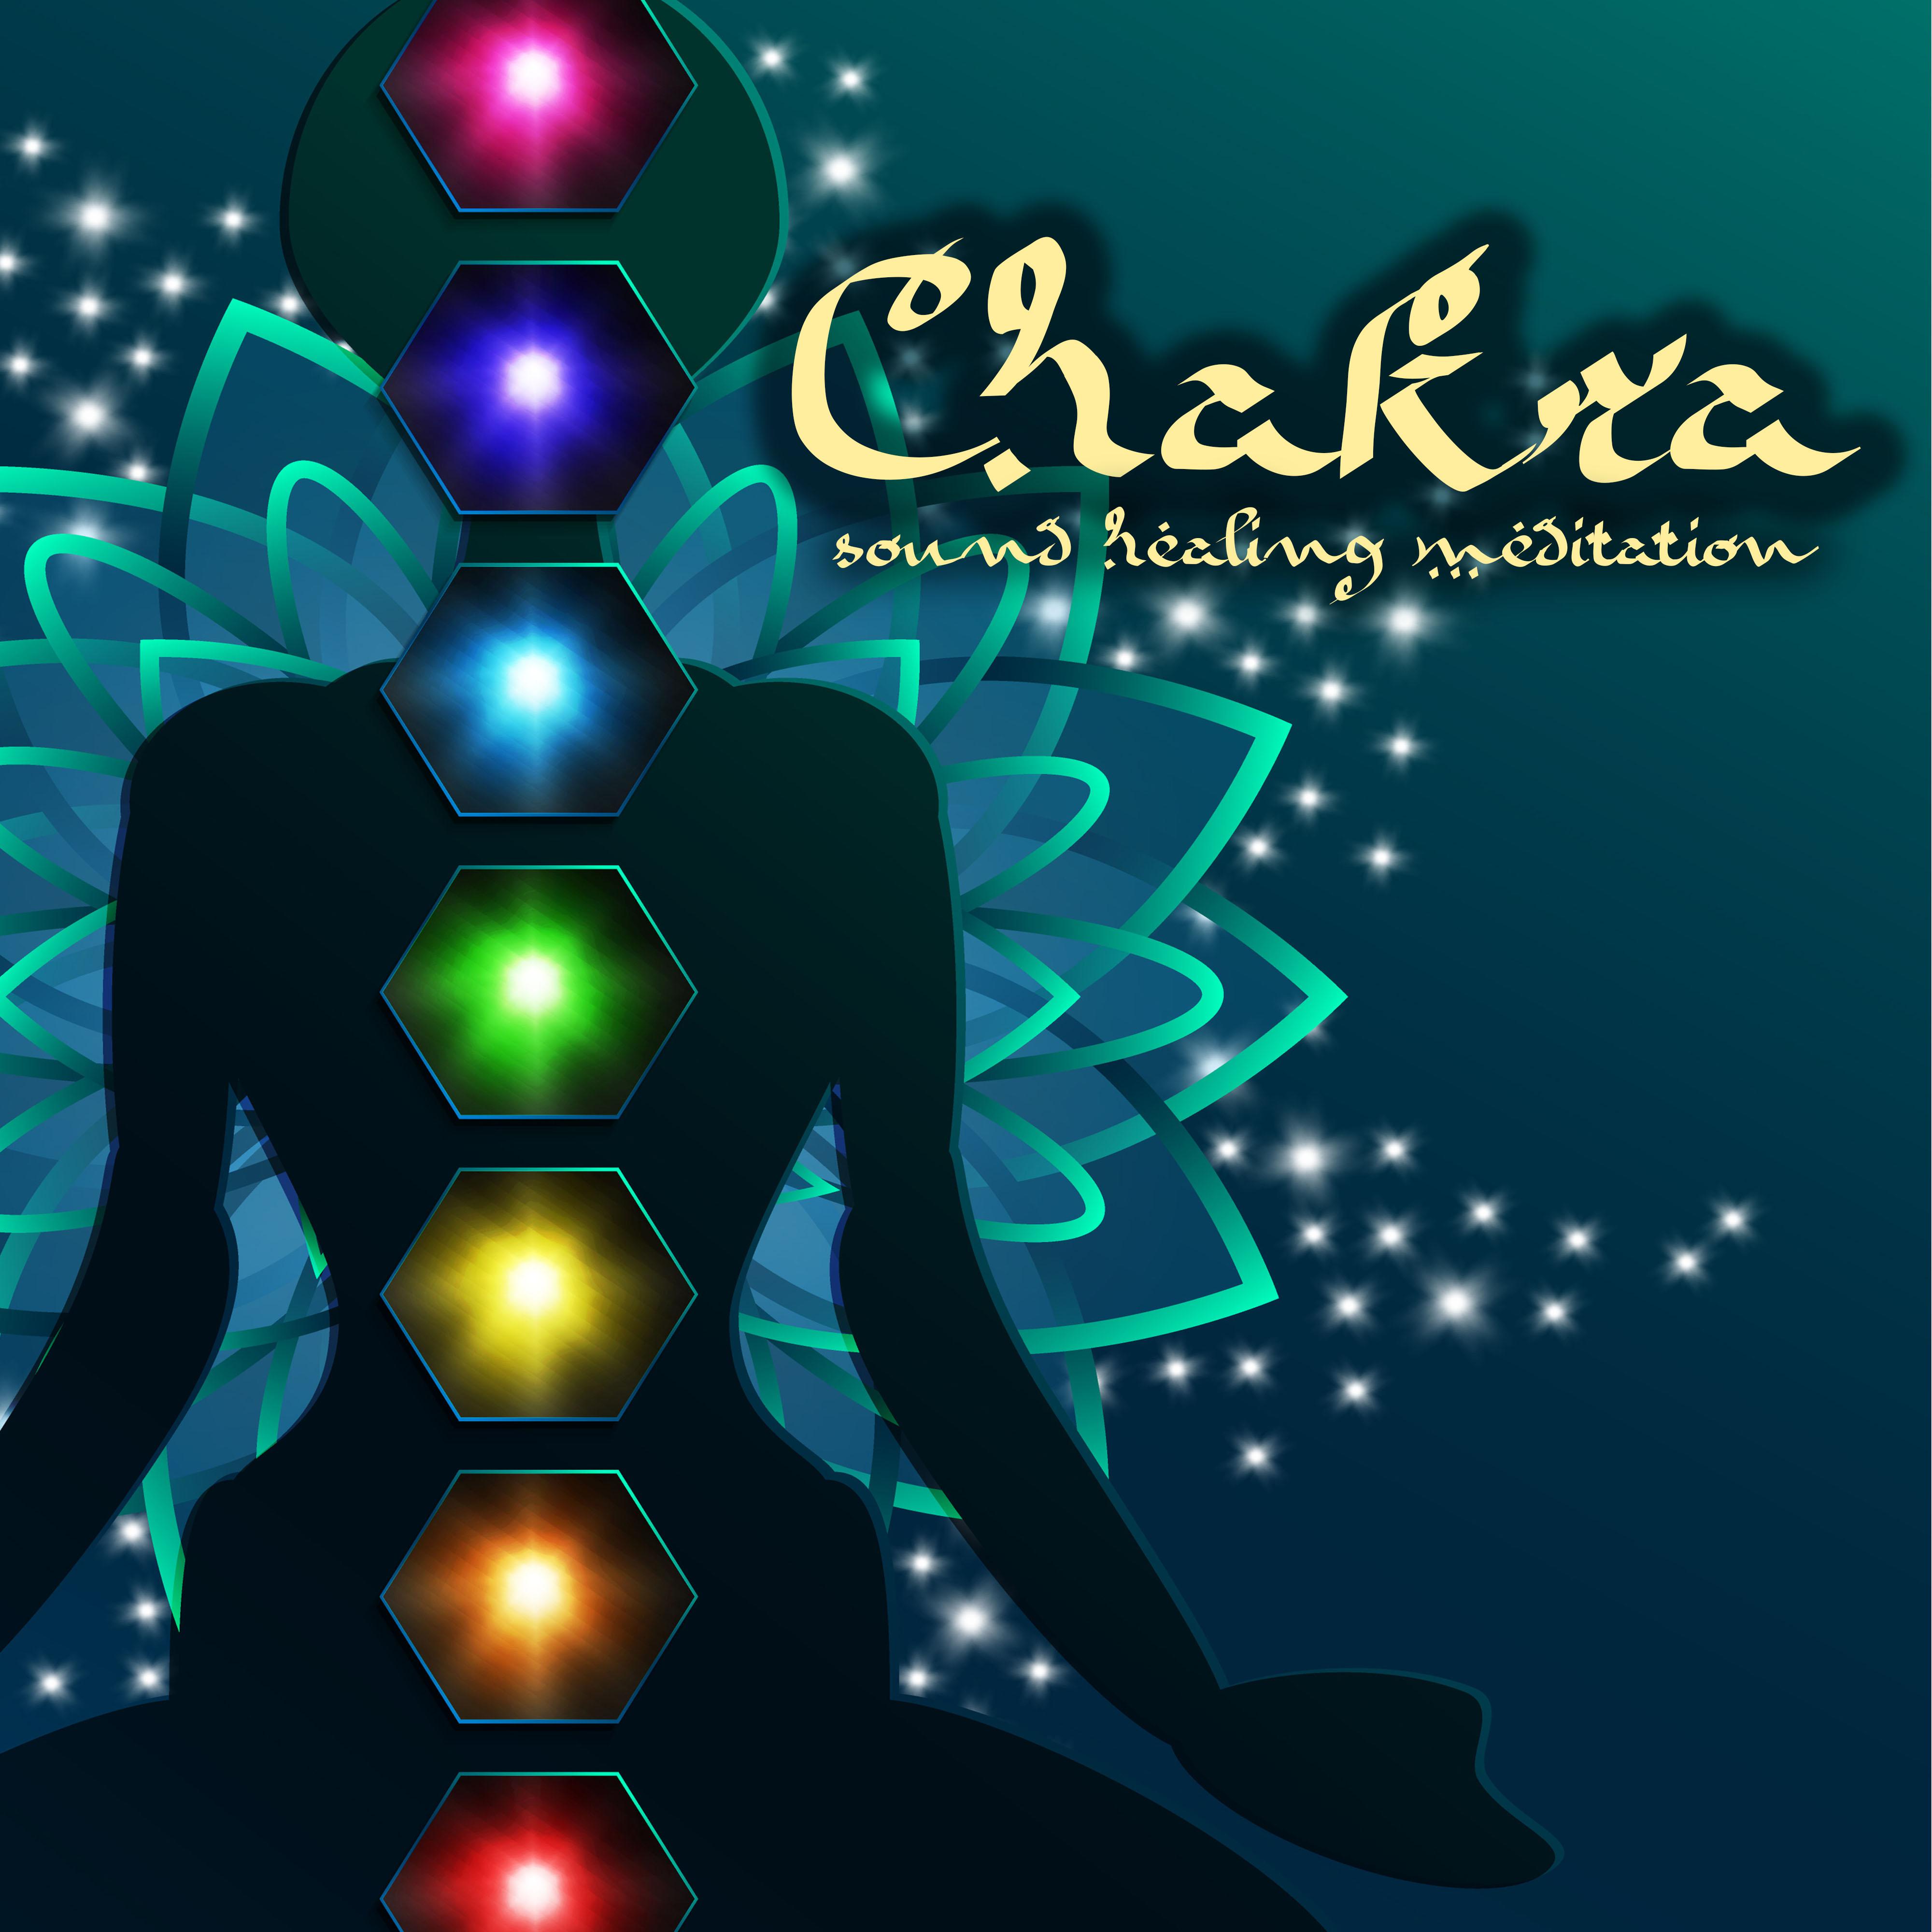 Chakra Sound Healing Meditation - Music for Balancing Chakras, Anxiety Disorder, Therapy for Inner Balance Relaxation, Restful Sleep and Stress Relief